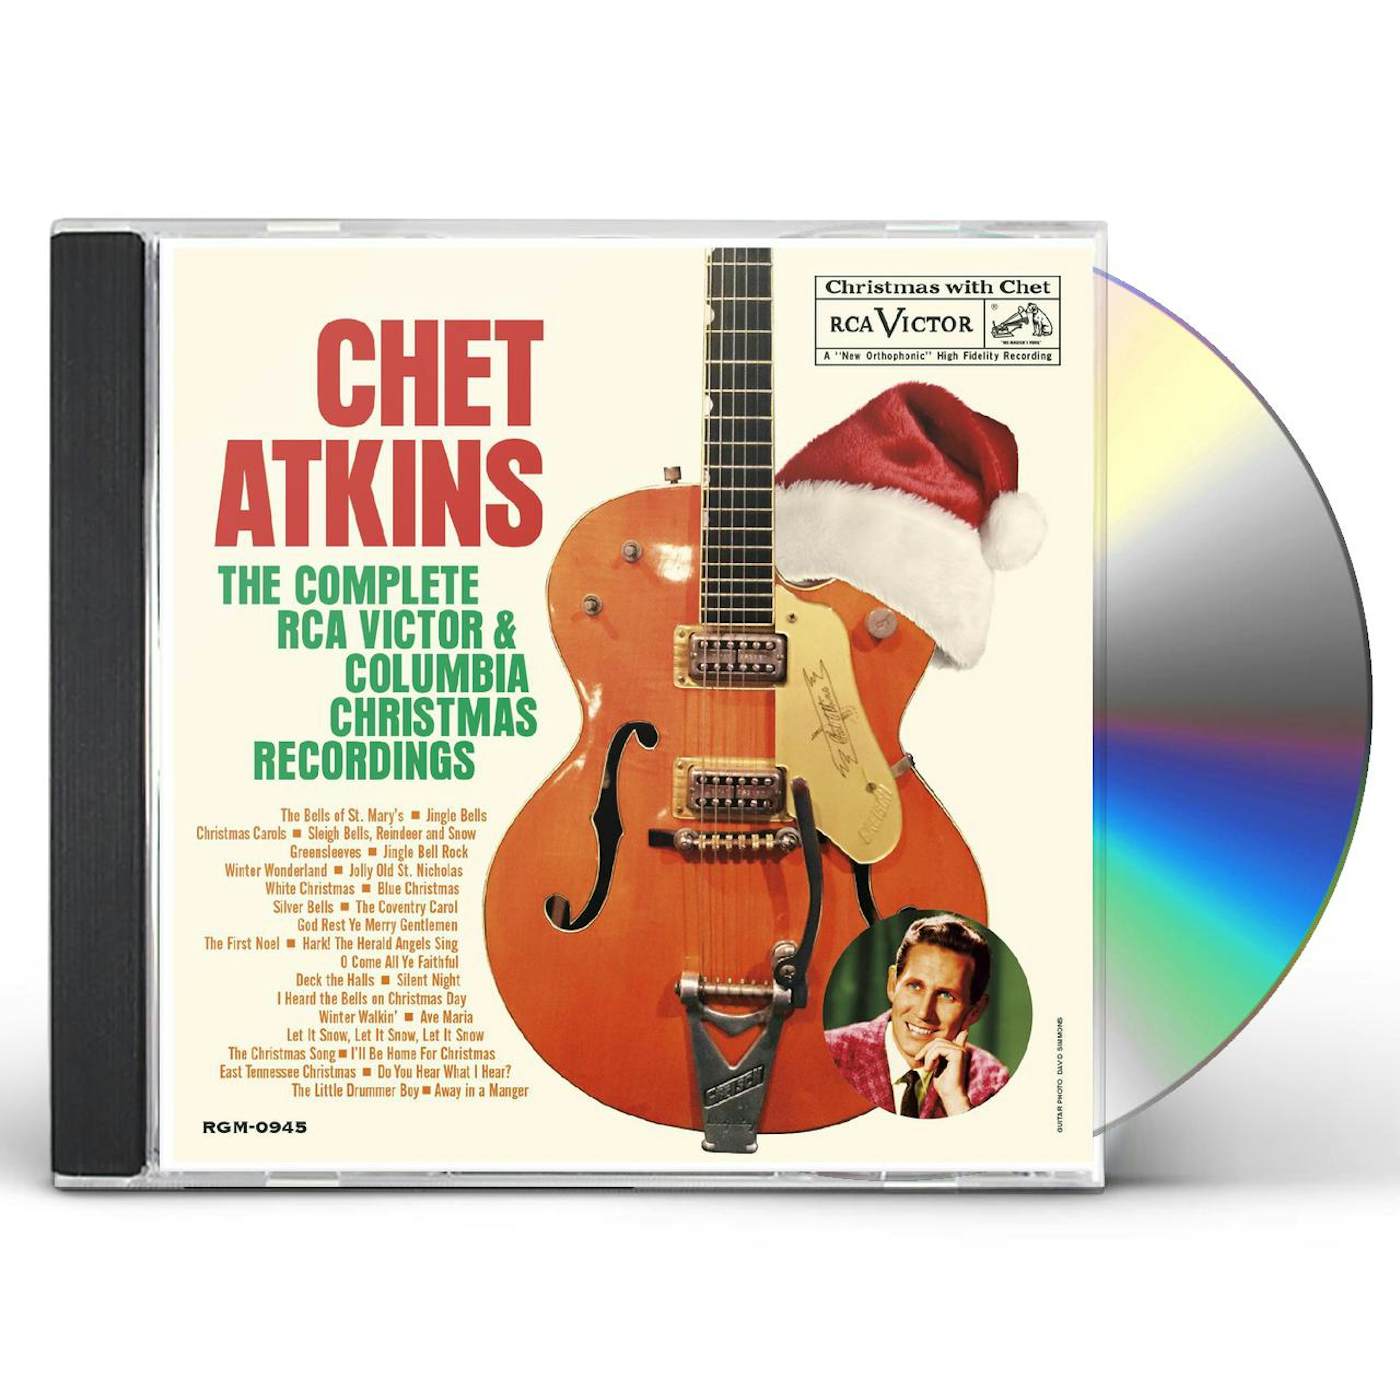 Chet Atkins COMPLETE RCA VICTOR & COLUMBIA CHRISTMA RECORDINGS CD